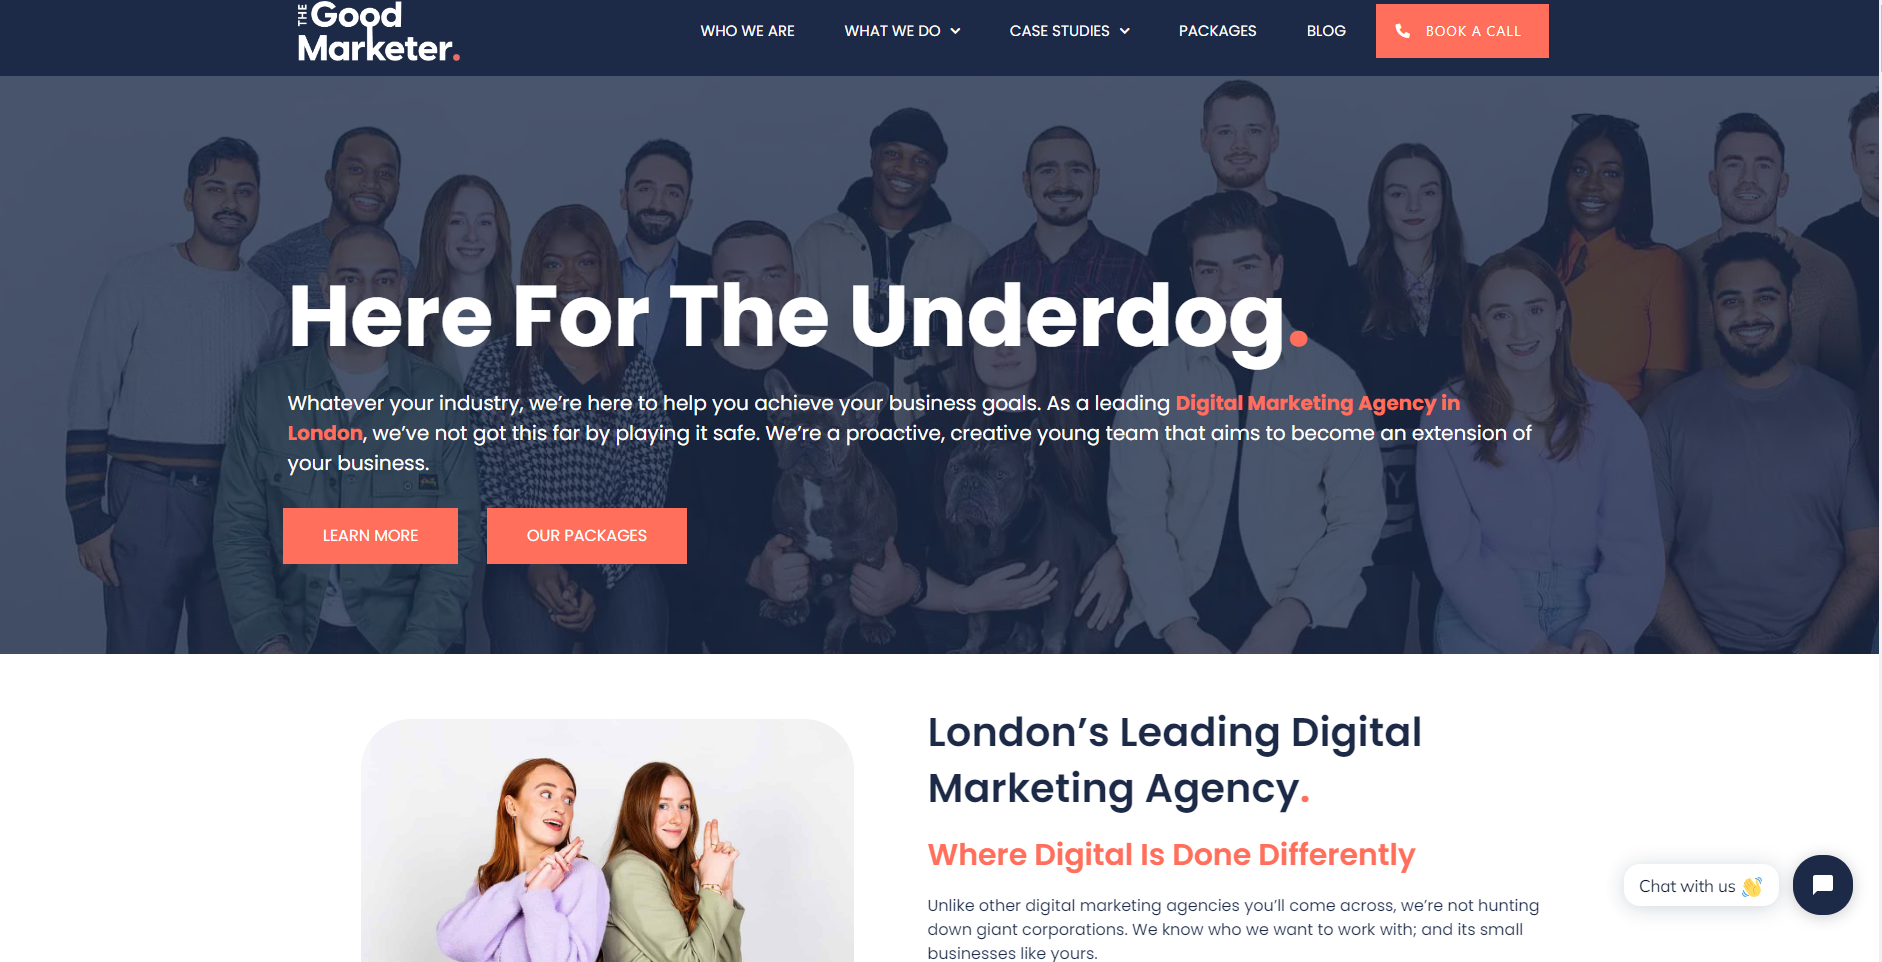 The Good Marketer London Facebook Ads Agency Homepage